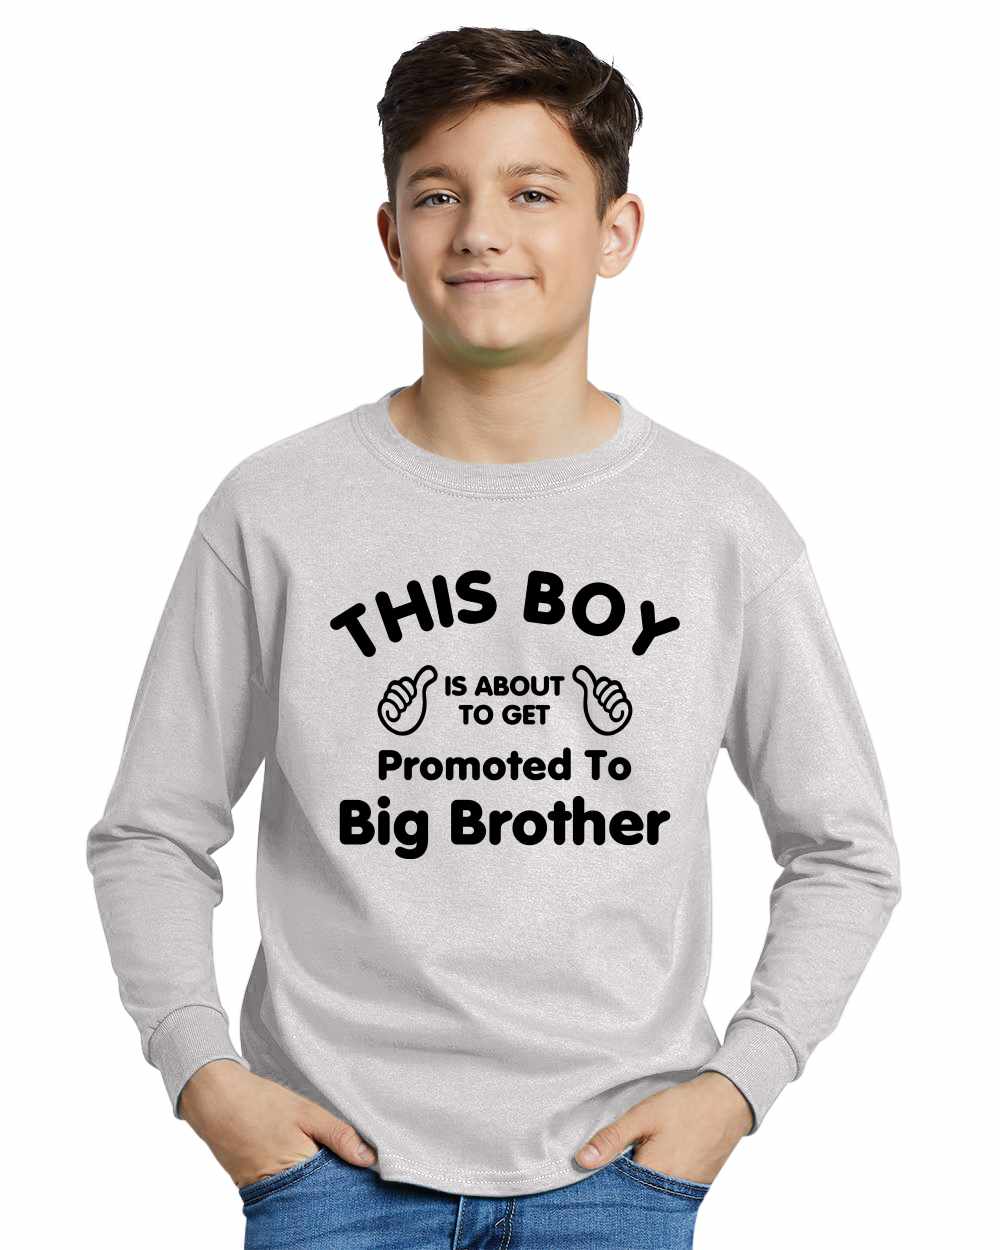 This Boy is About To Get Promoted To Big Brother on Youth Long Sleeve Shirt (#975-203)